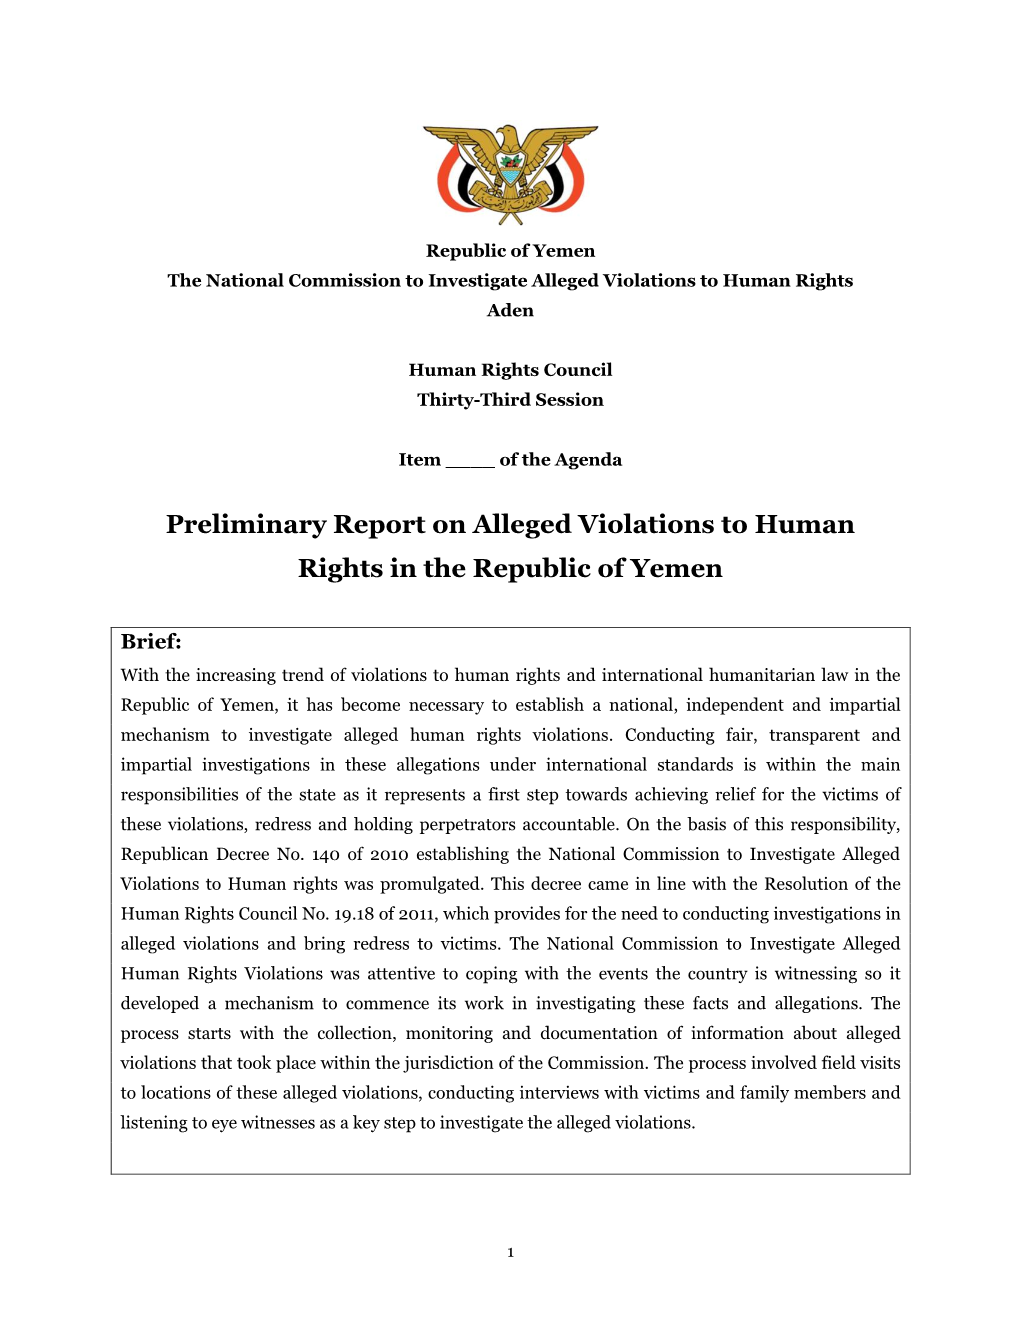 Preliminary Report on Alleged Violations to Human Rights in the Republic of Yemen